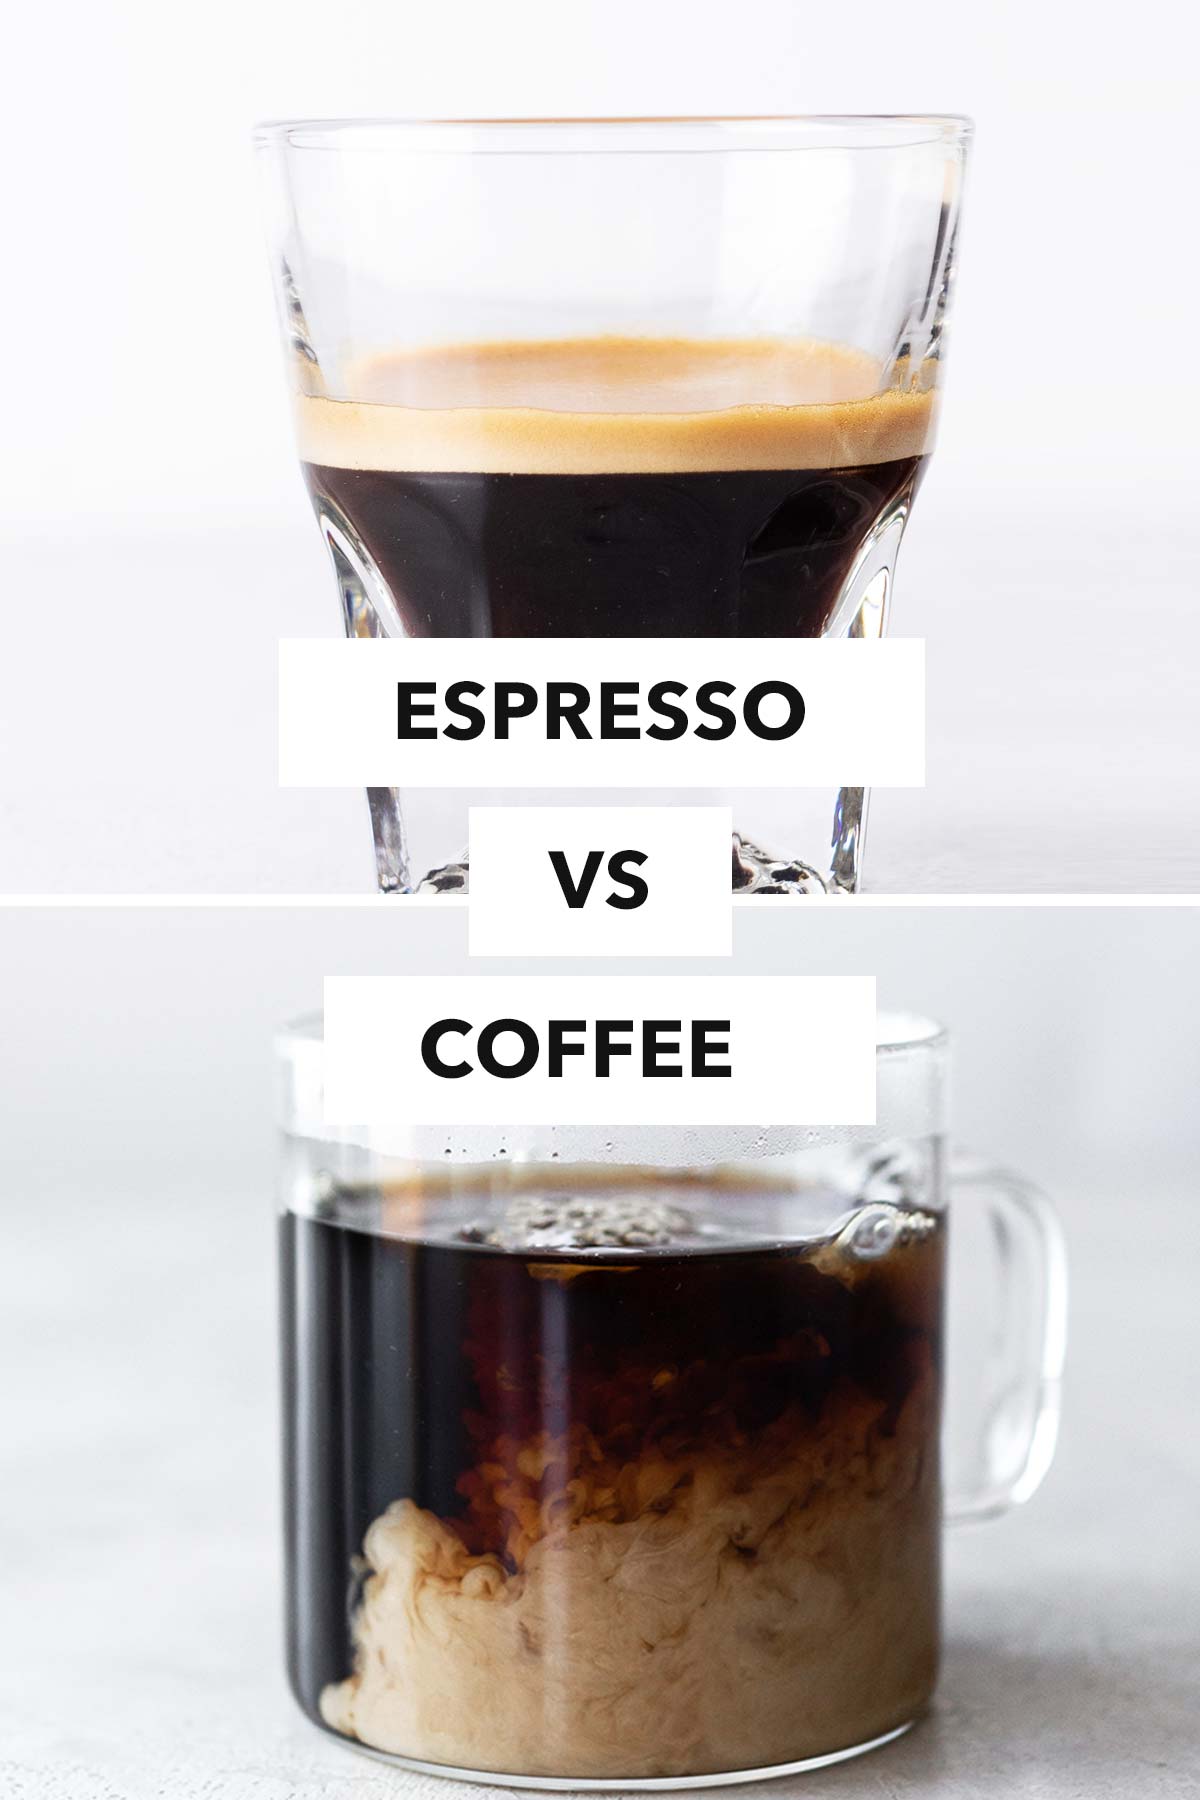 Photo of espresso on top and photo of coffee on the bottom.